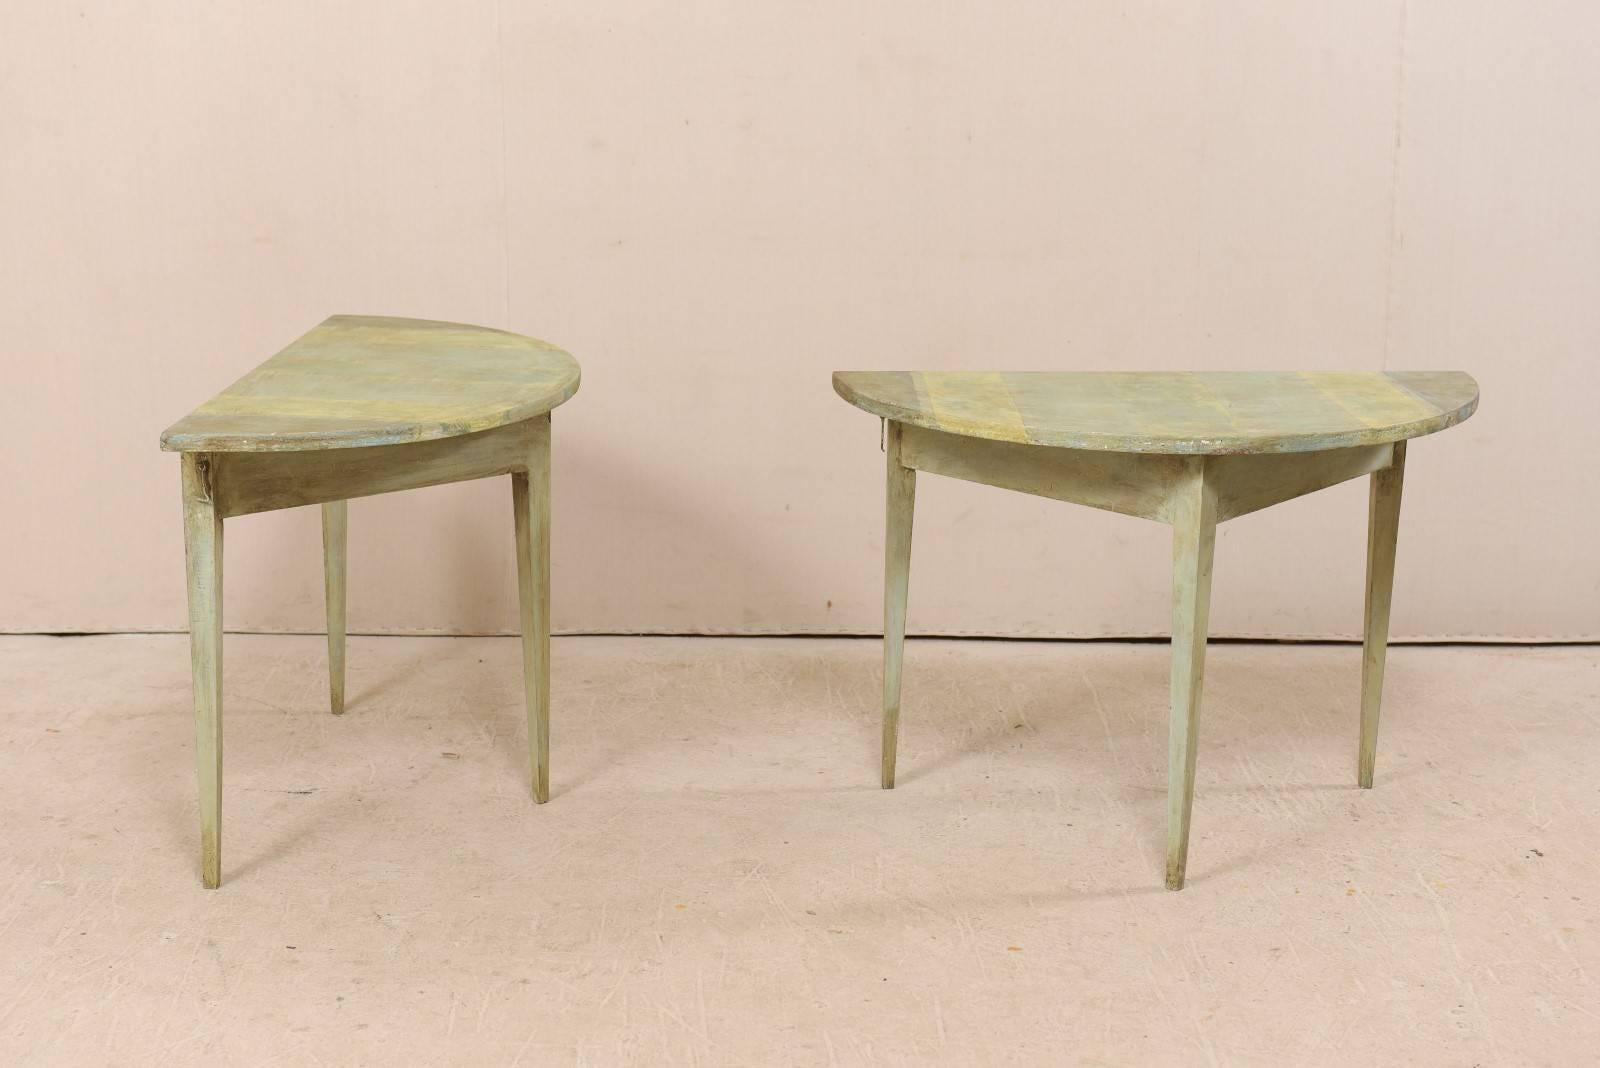 Carved Pair of Swedish 19th Century Painted Wood Demilune Tables